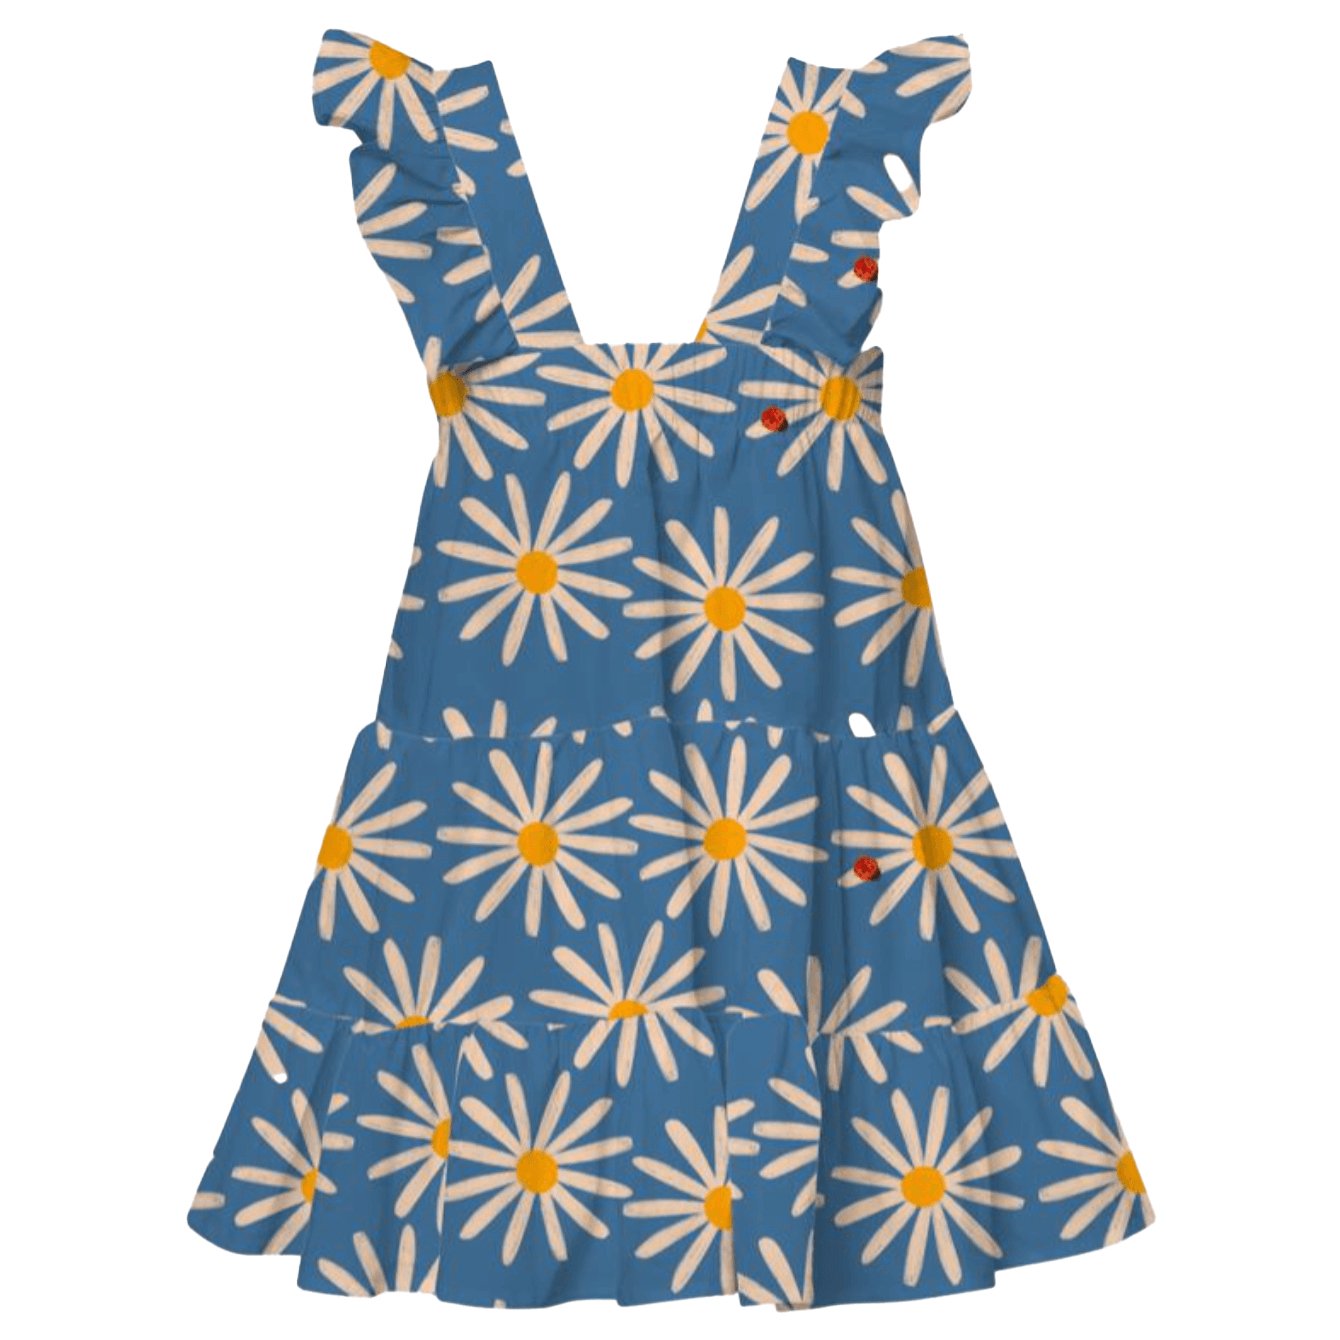 Back image of a blue printed daisy flower dress against a white background.